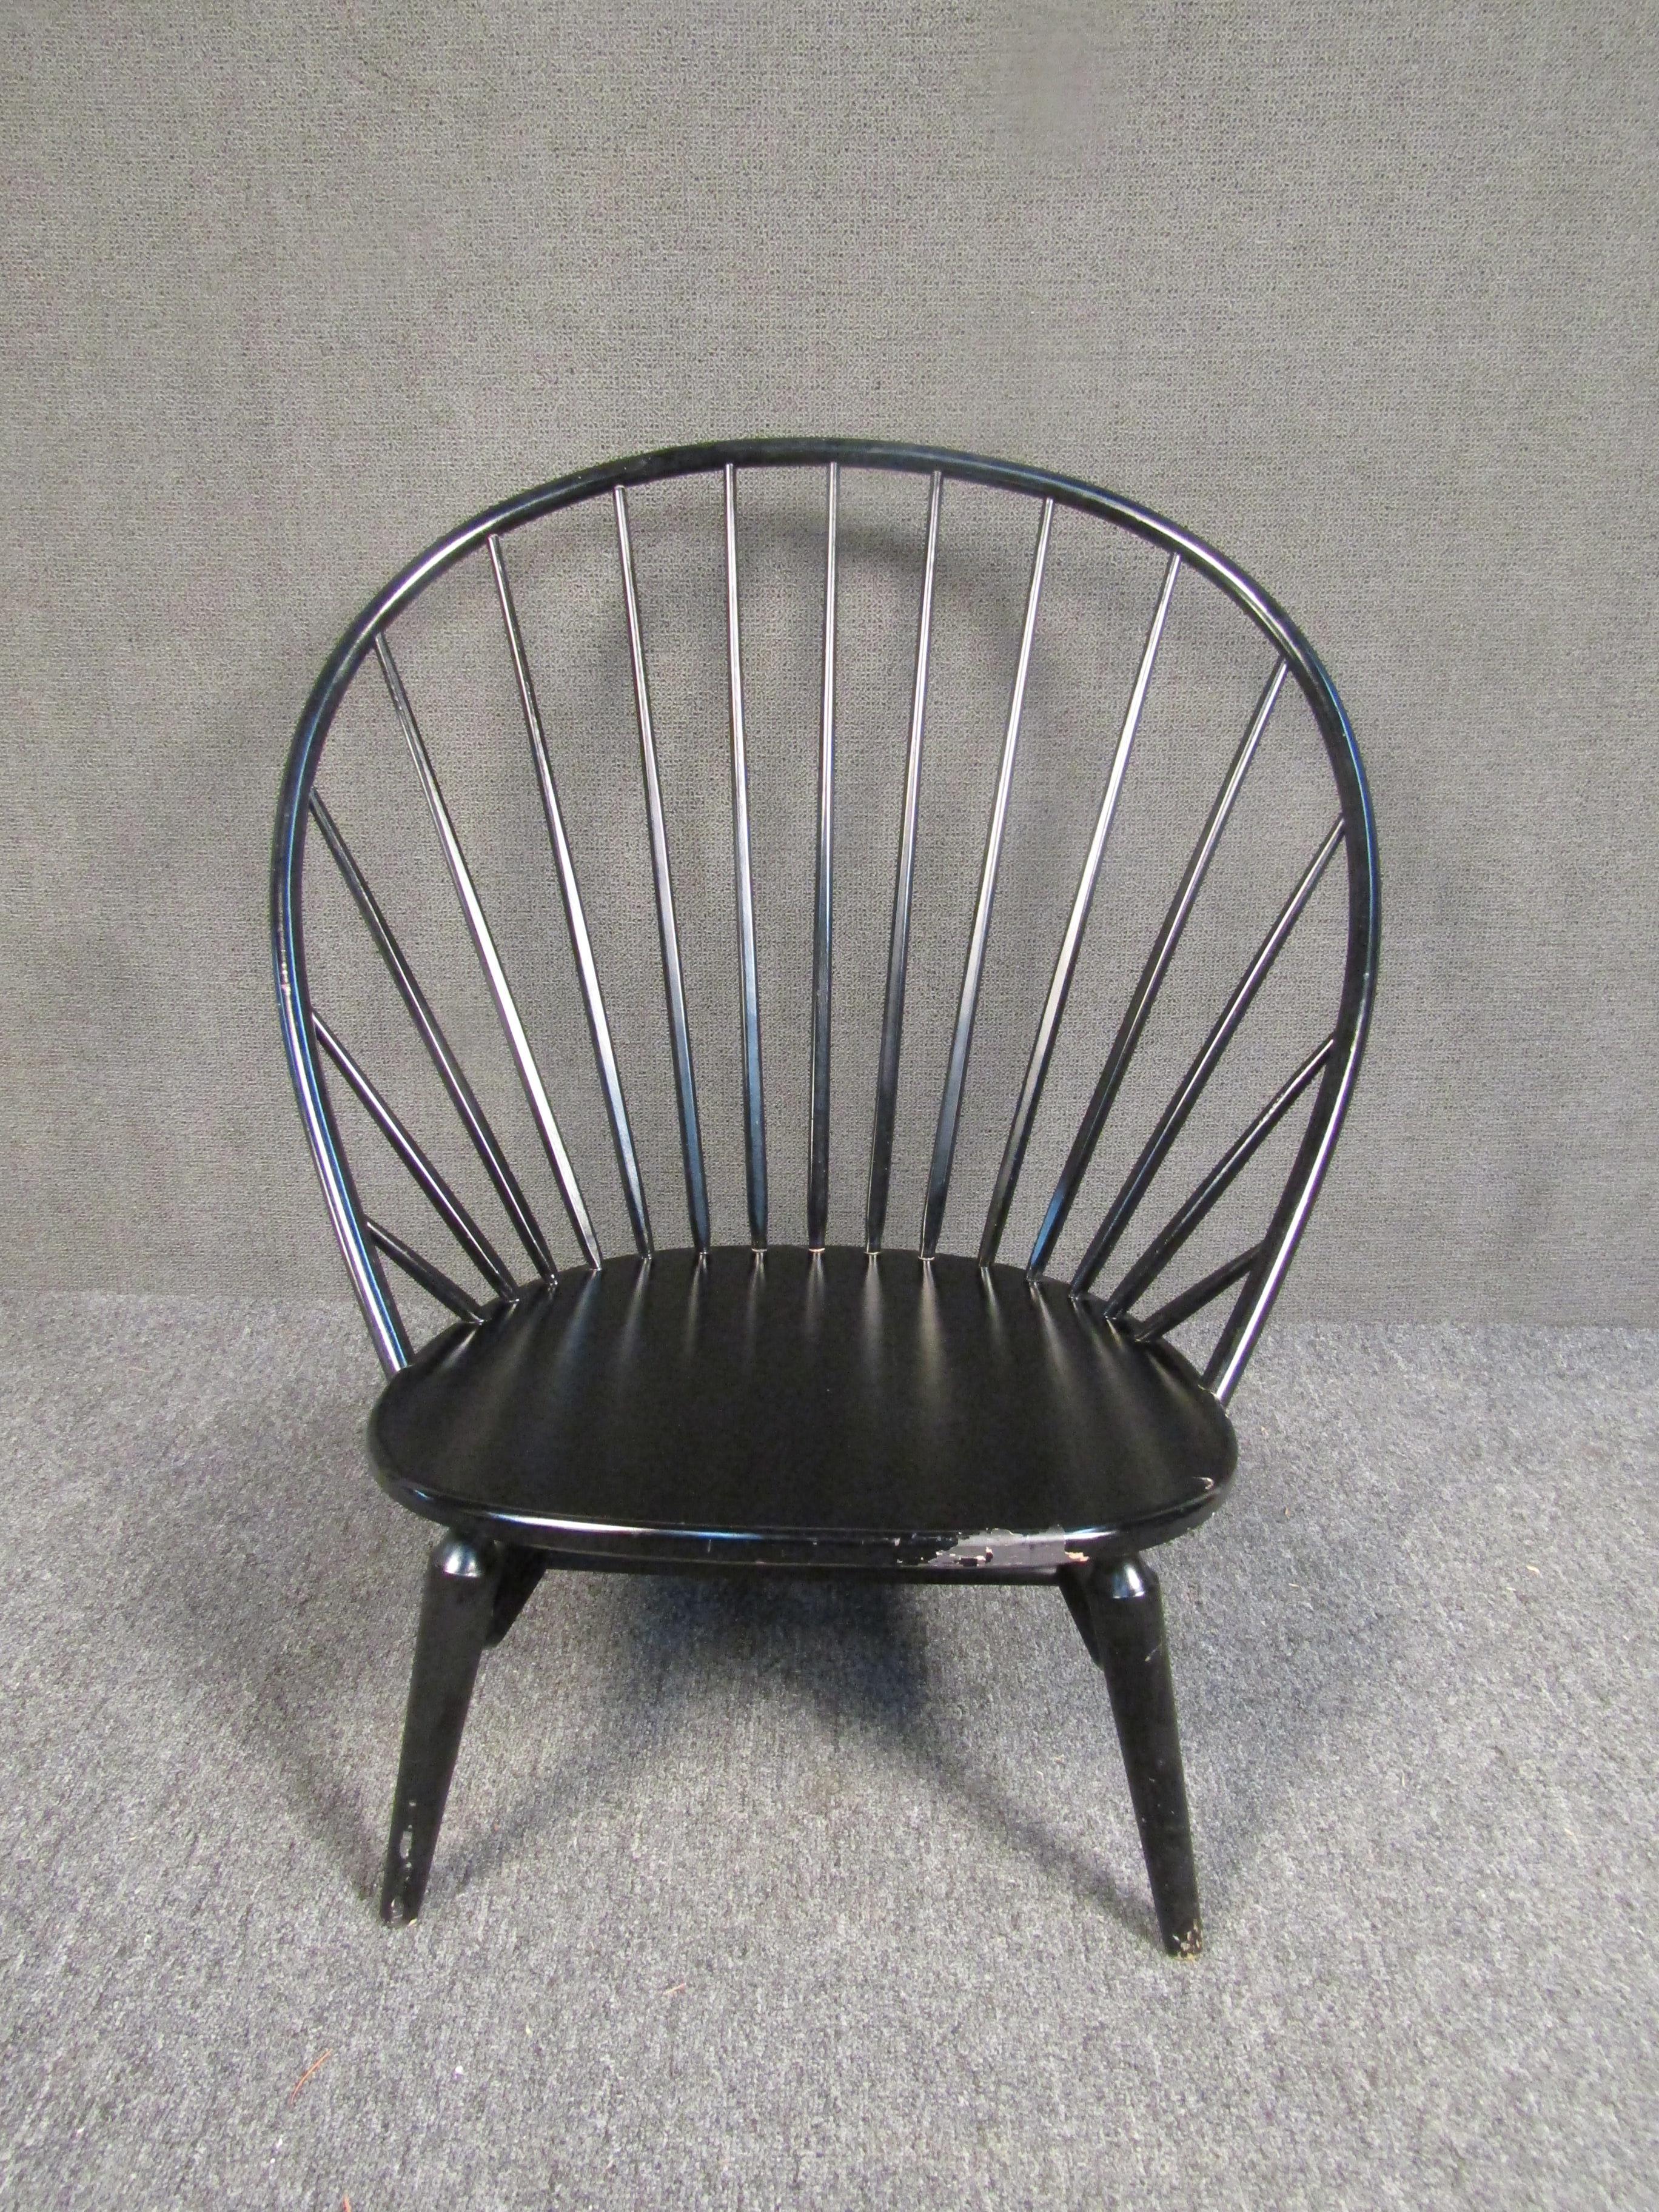 Swedish modern wood peacock spindle lounge chair. Item features solid wood construction, clean modern lines, style and form. In the style of Hans Wegner. 

(Please confirm item location - NY or NJ - with dealer).
   